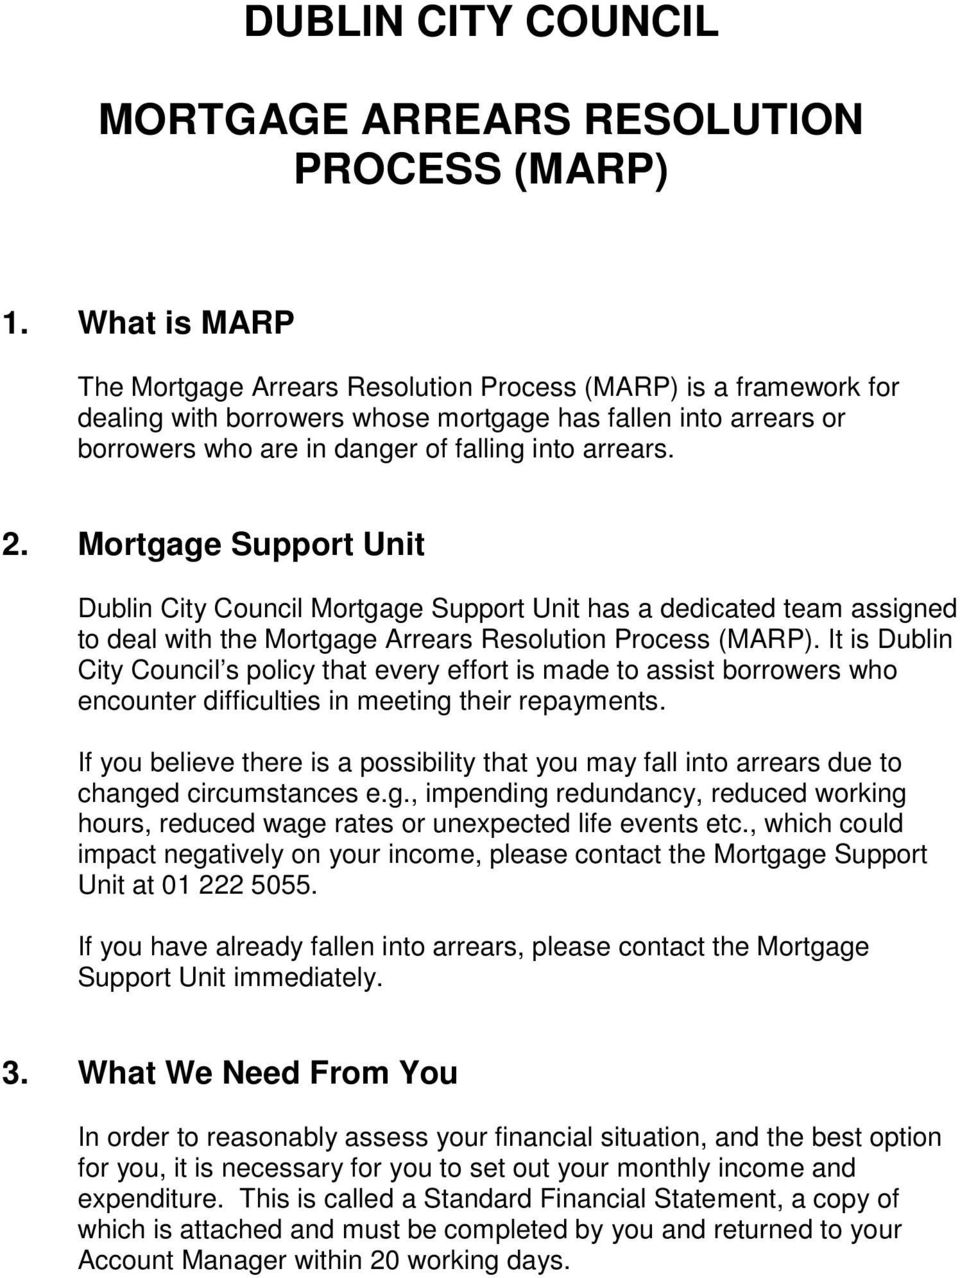 Mortgage Support Unit Dublin City Council Mortgage Support Unit has a dedicated team assigned to deal with the Mortgage Arrears Resolution Process (MARP).